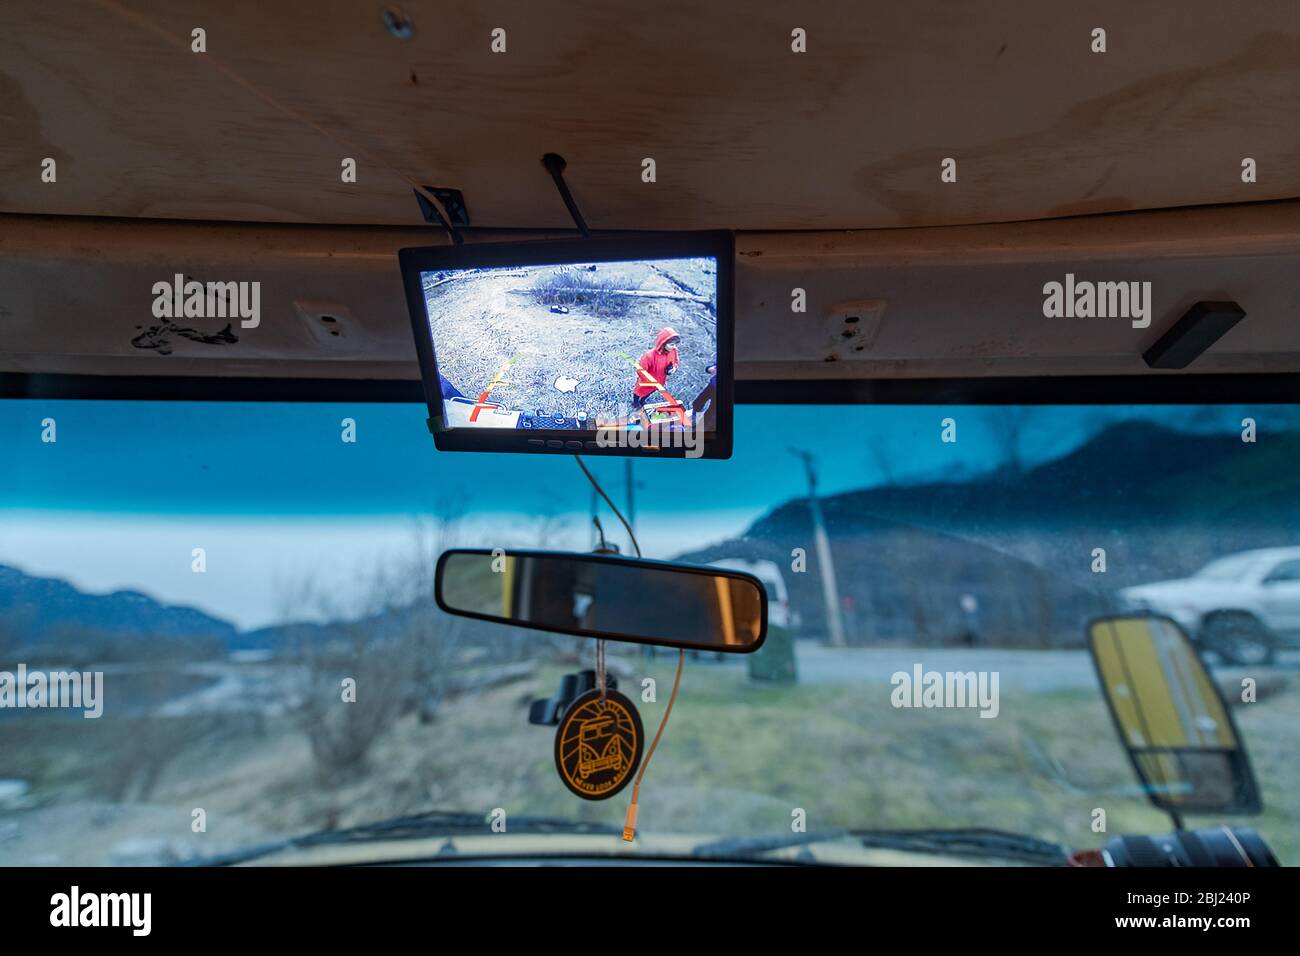 Campervan parked, view through windscreen of wet weather and rocky landscape, one person visible in mirror. Stock Photo